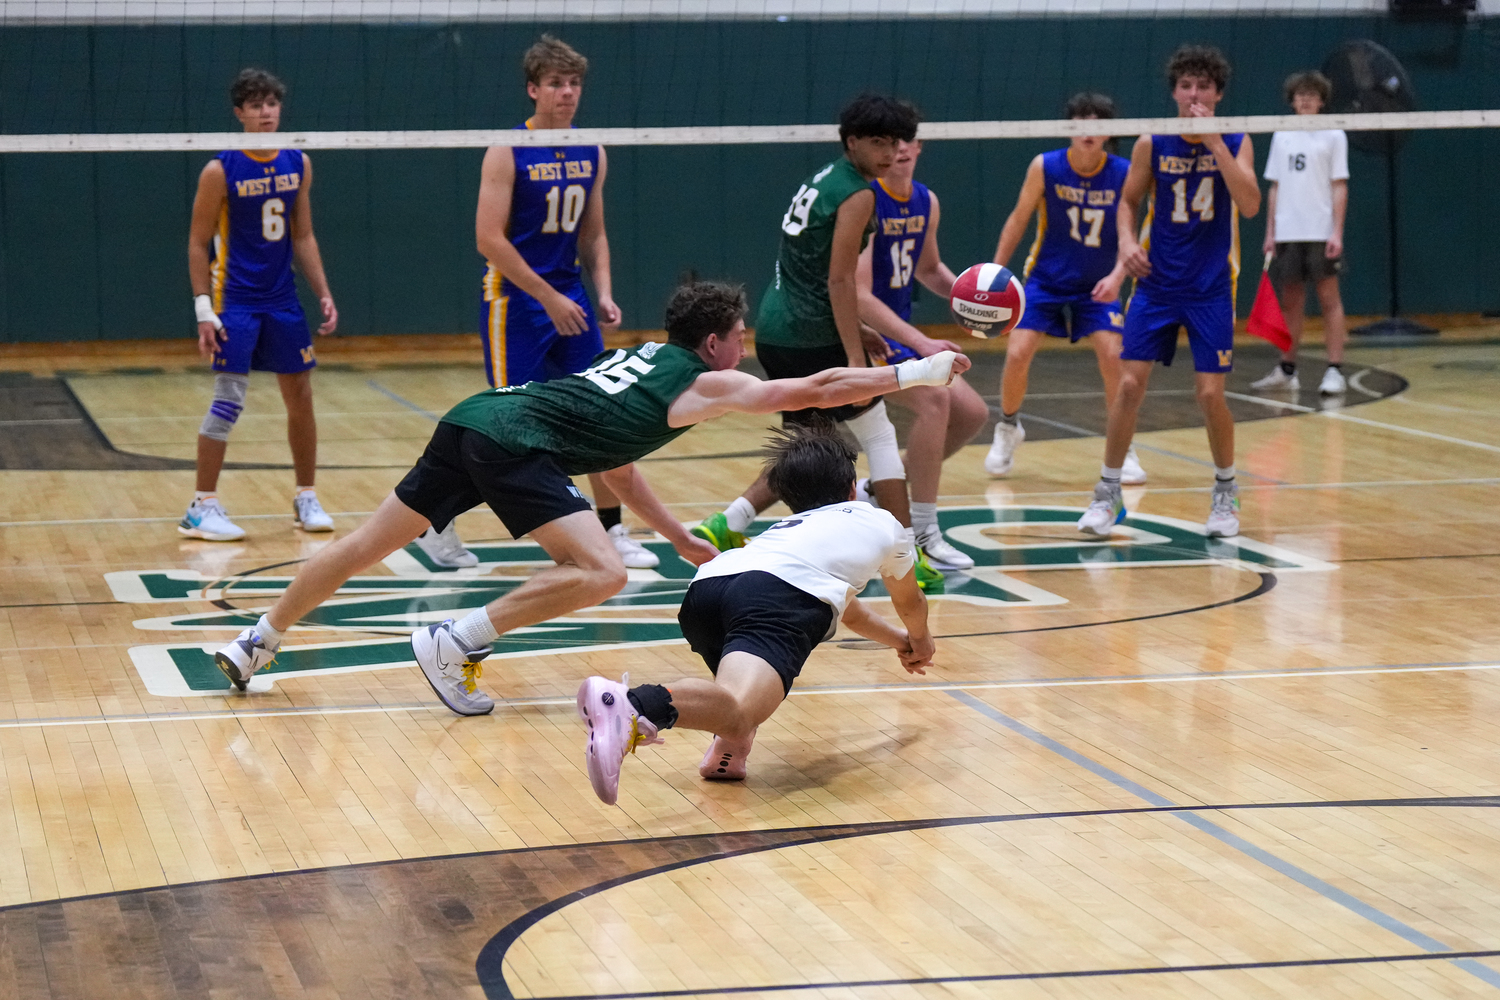 Senior outside hitter Will Jankowski and junior liber Aaron Kiefer dive for the ball. RON ESPOSITO